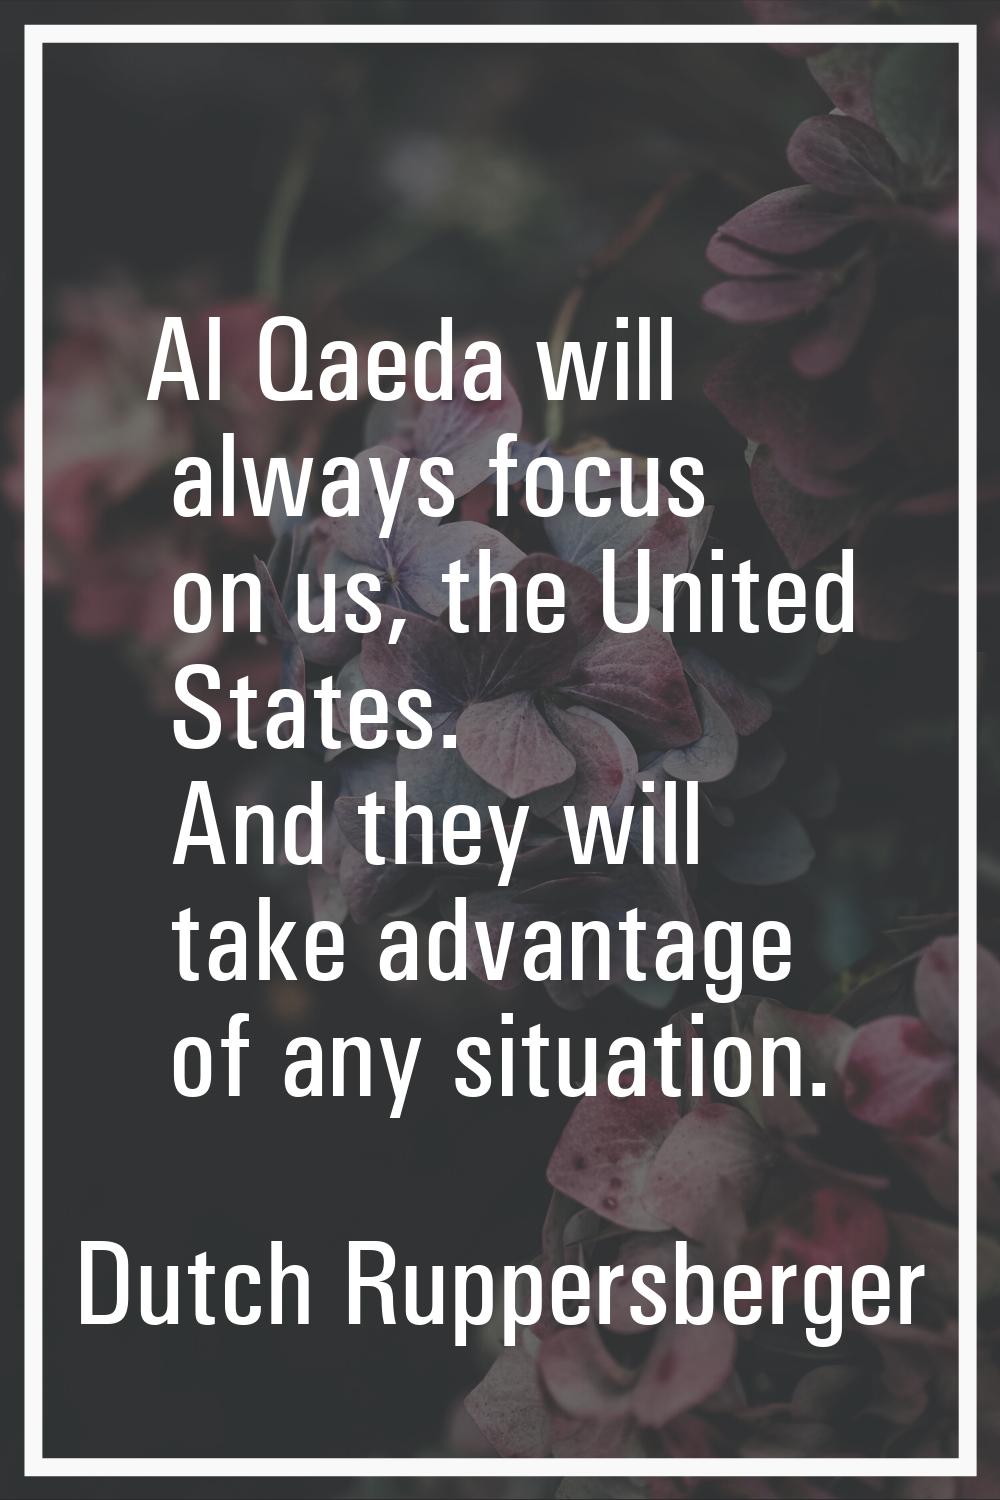 Al Qaeda will always focus on us, the United States. And they will take advantage of any situation.